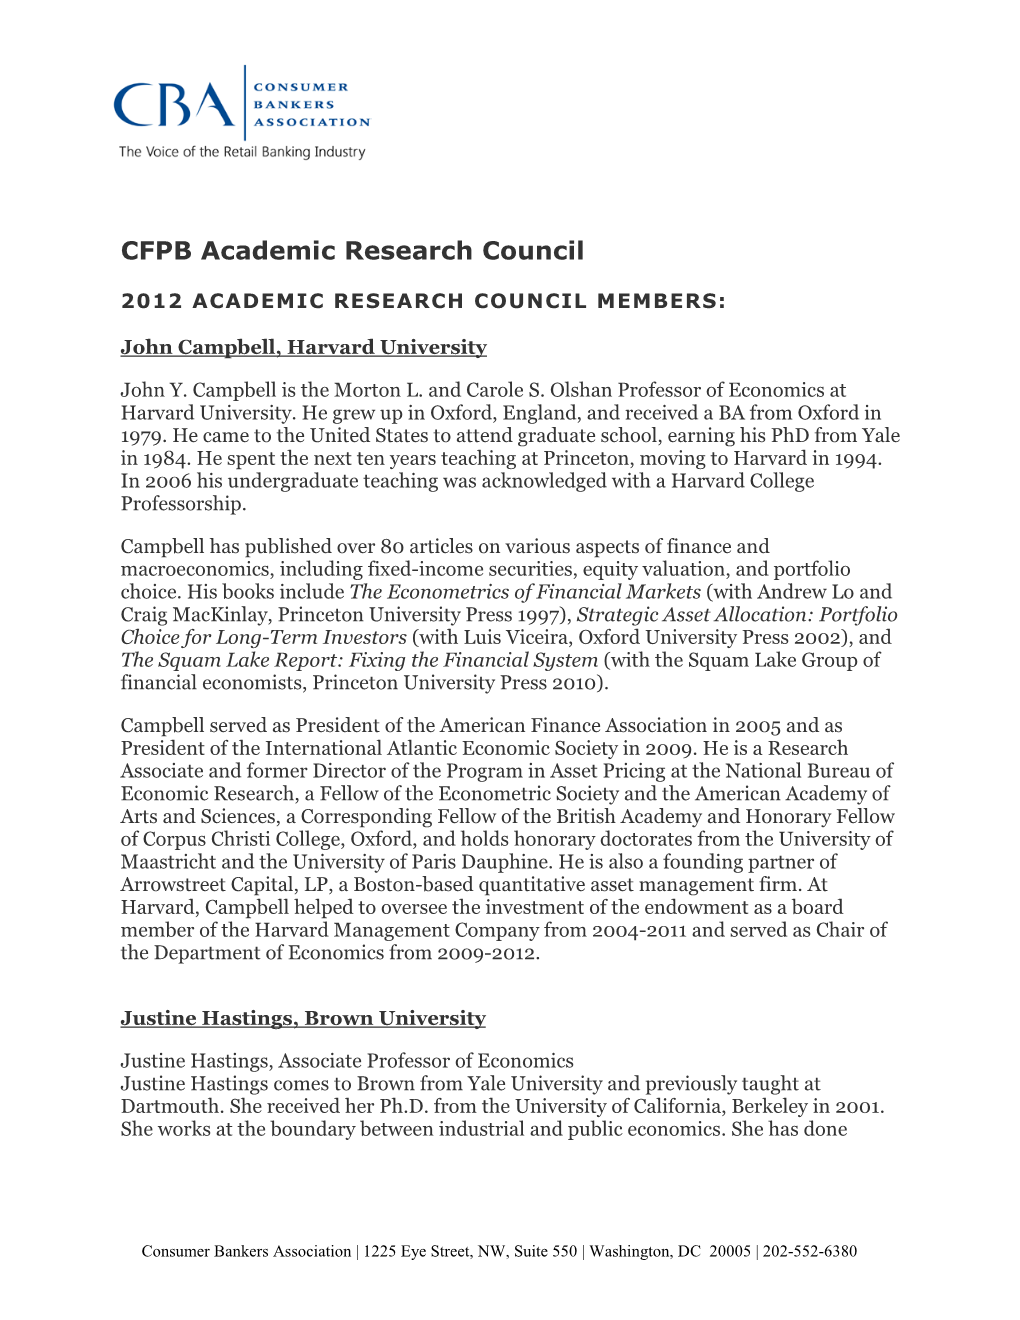 CFPB Academic Research Council